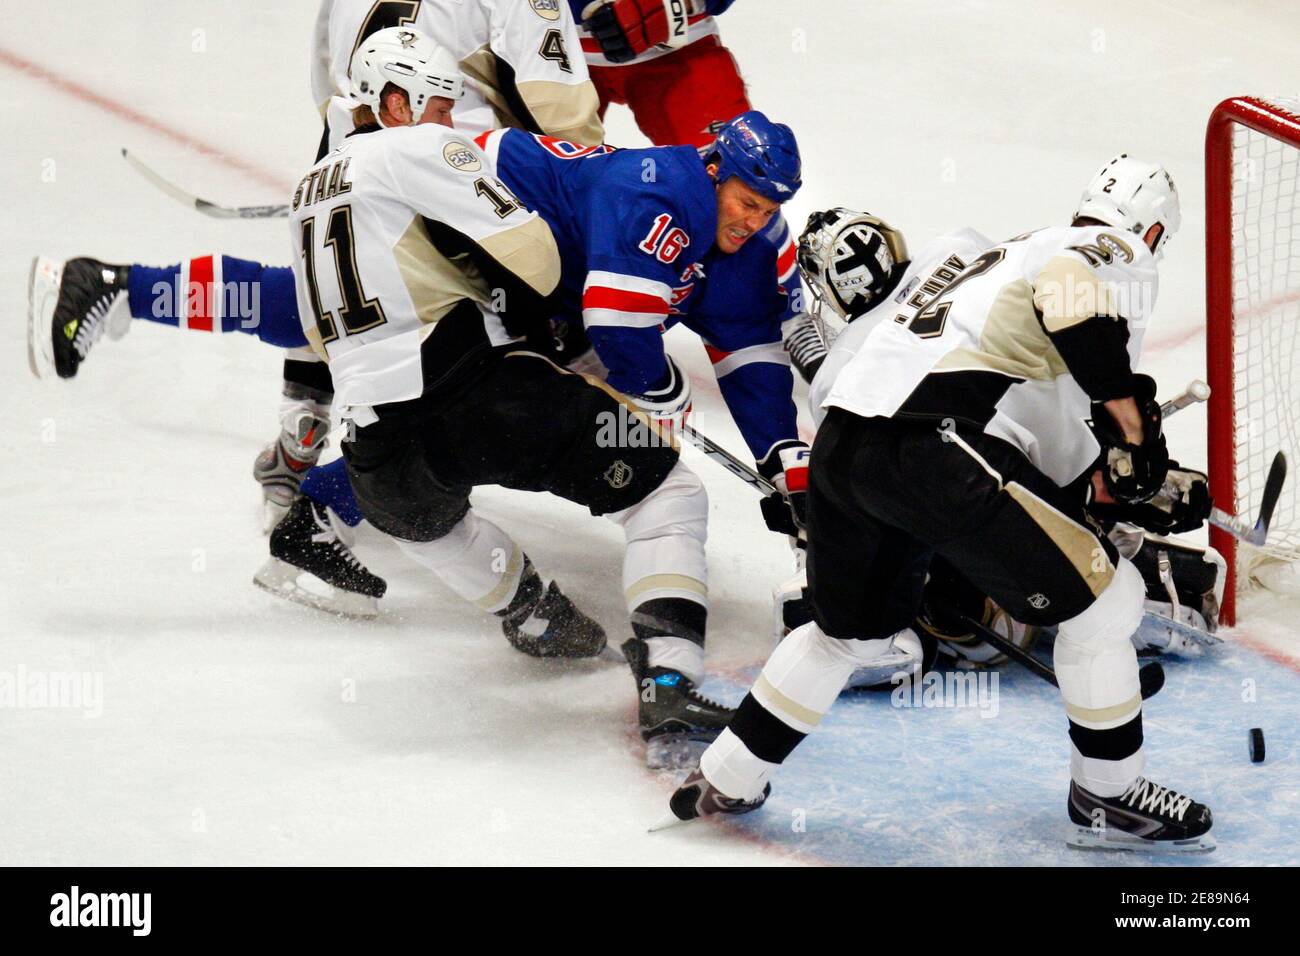 New York Rangers' Sean Avery (C-#16) dives towards the puck in front of the Pittsburgh Penquins goal in the second period of Game 3 of their NHL Eastern Conference semi-finals series in New York in this file photo April 29, 2008. The Rangers announced on April 30, 2008 that Avery suffered a lacerated spleen in Tuesday night's game and will be sidelined for the remainder of the season. At left is Penguins' Jordan Staal and at right is Penguins'Hal Gill.  REUTERS/Mike Segar/Files  (UNITED STATES) Stock Photo